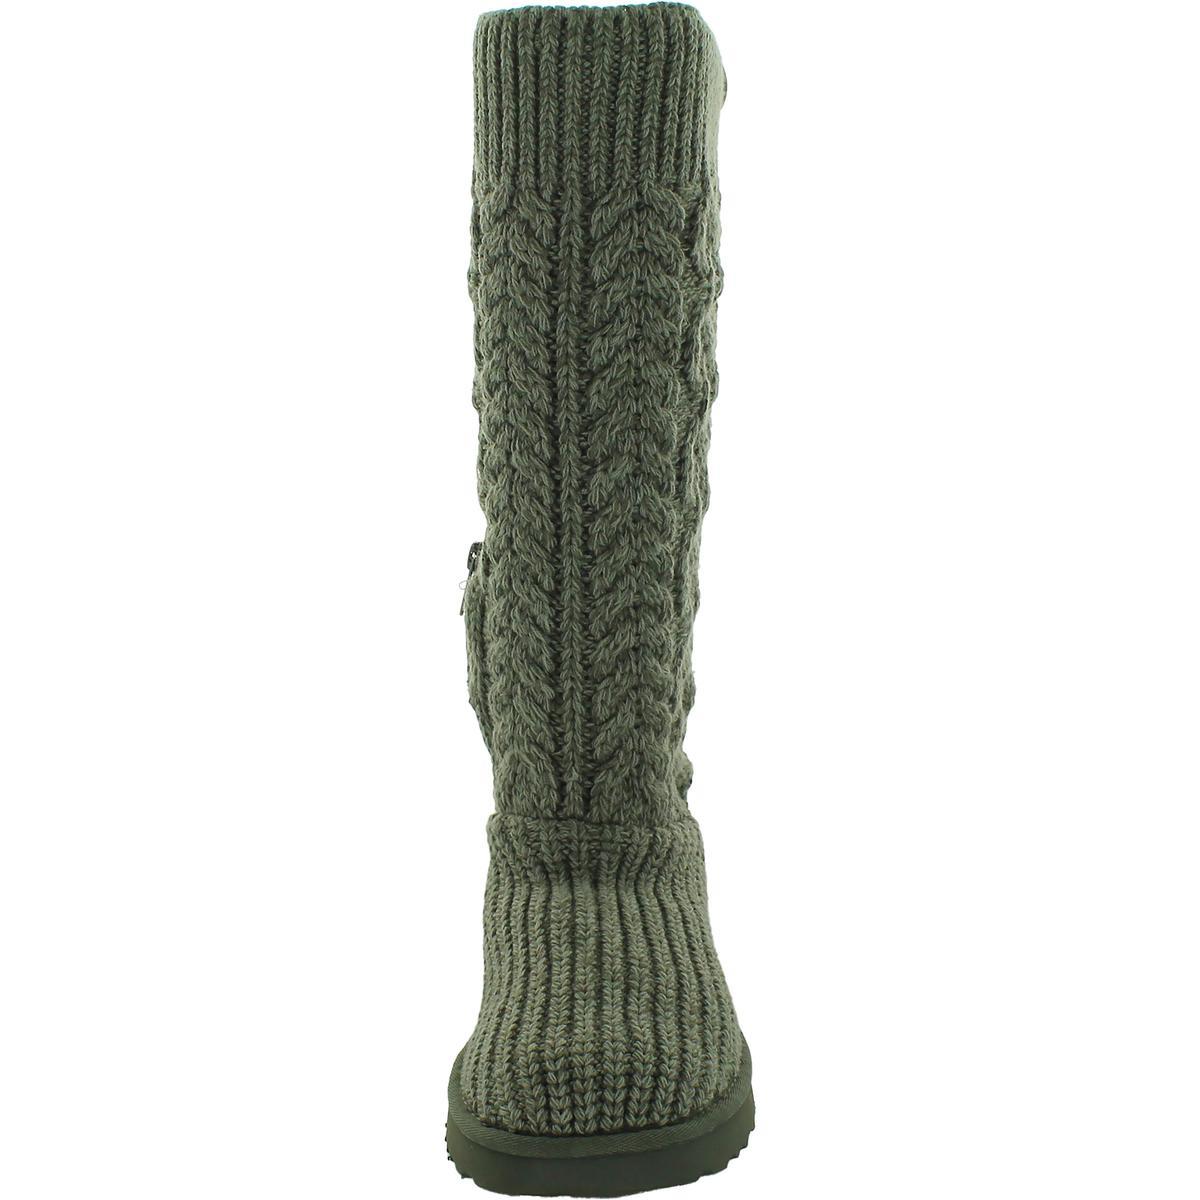 Ugg Womens Cardi Cable Knit Comfort Pull On Knee-high Boots Shoes Bhfo 7552 Grey